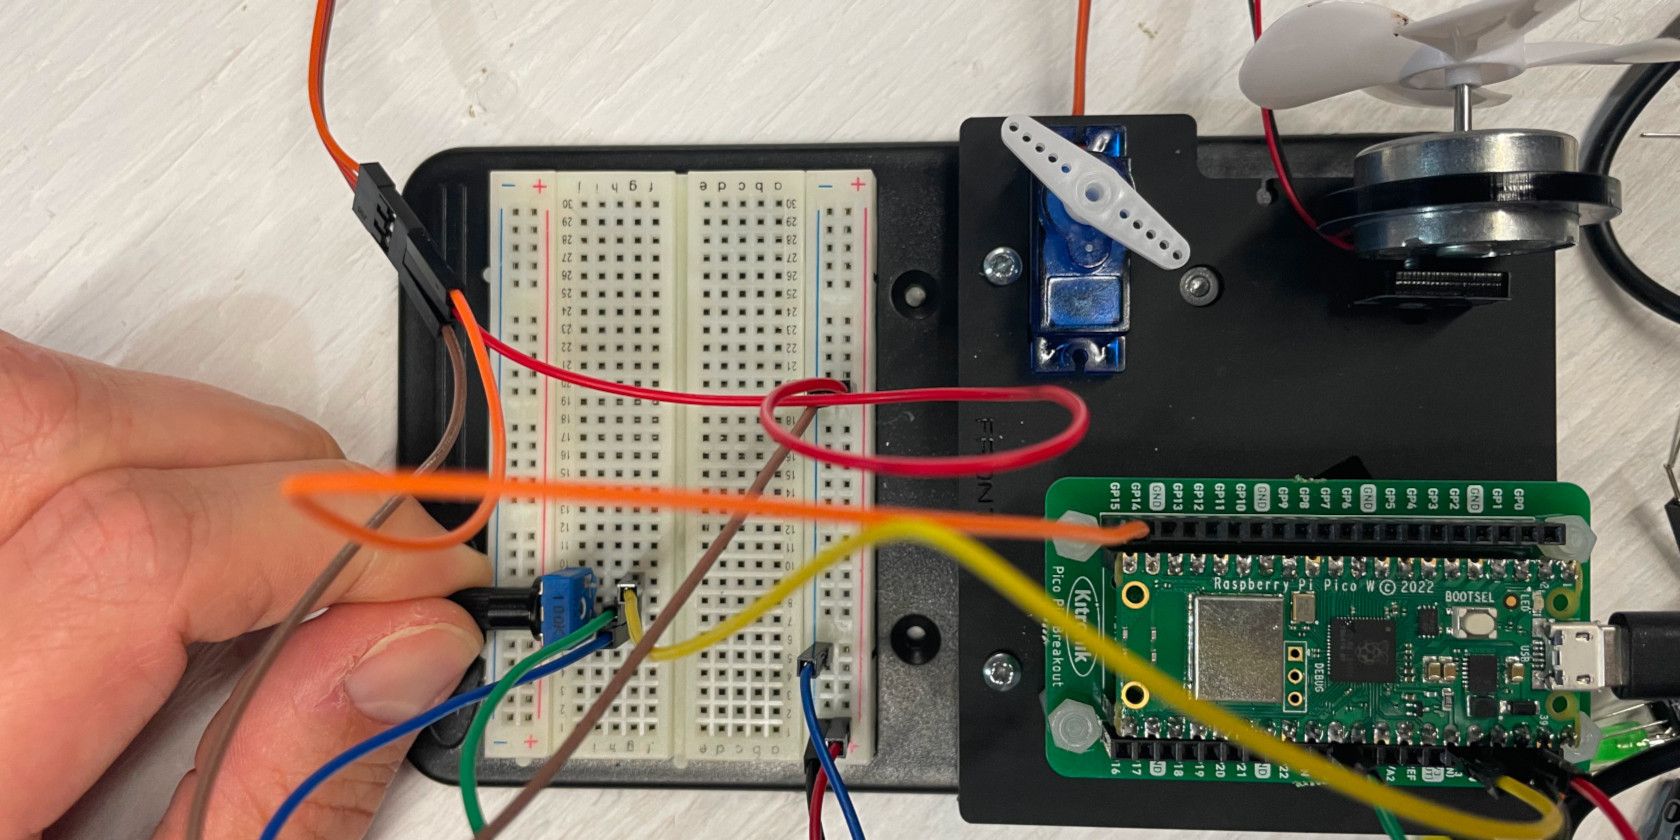 A Raspberry Pi Pico connected to components on a breadboard